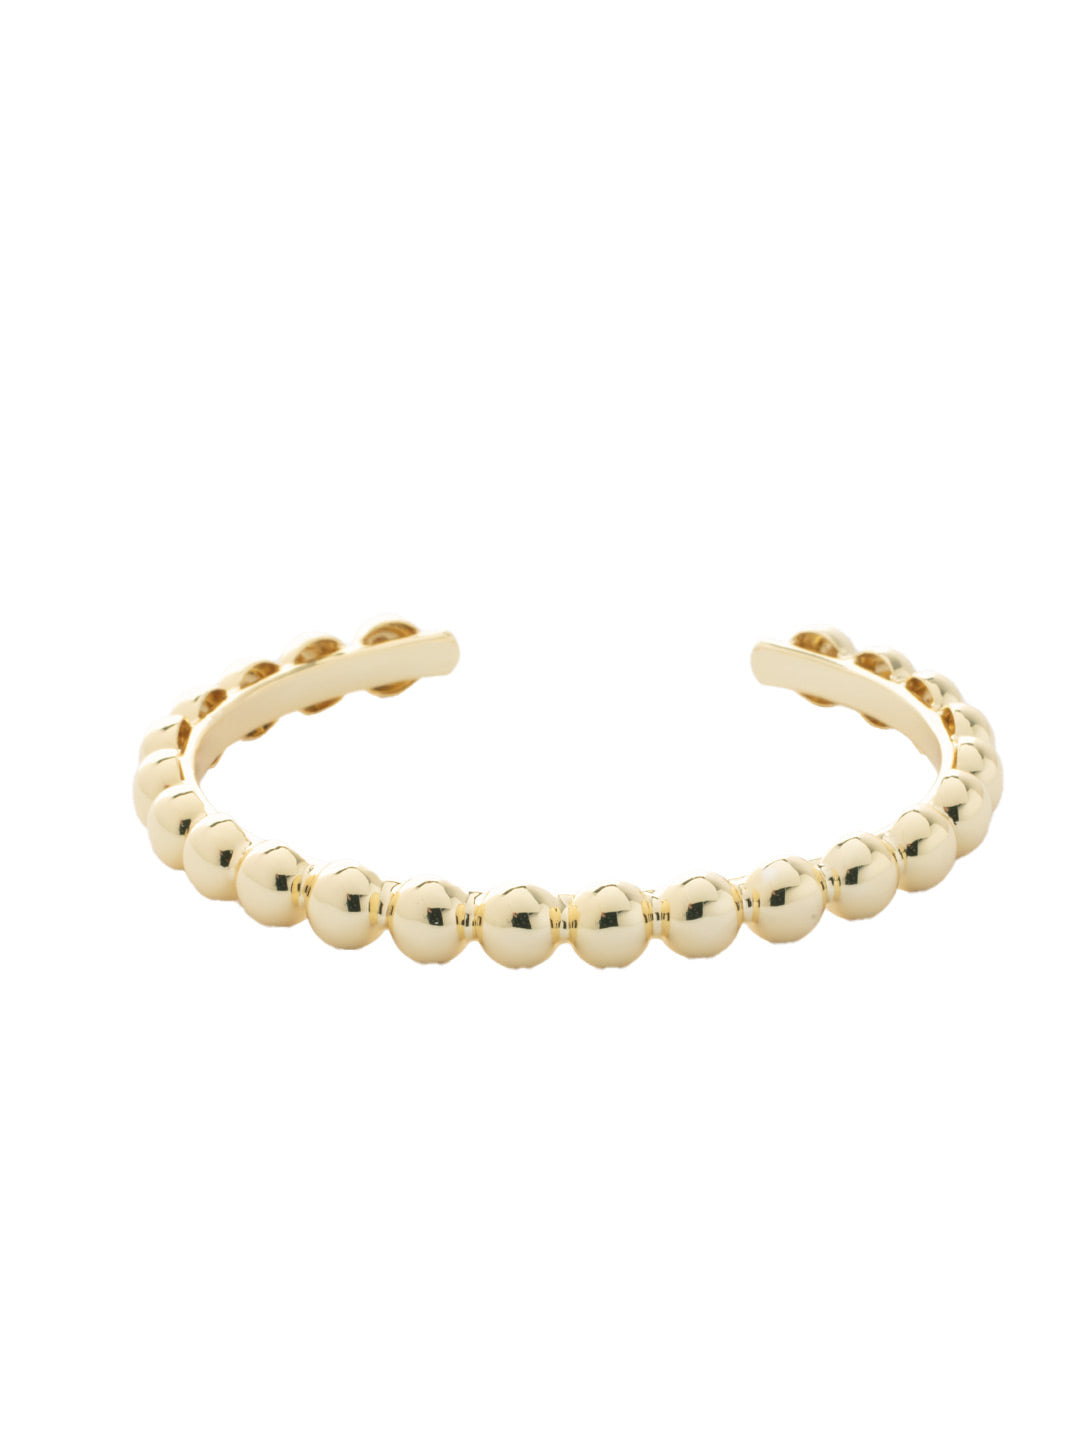 Bauble Cuff Bracelet - 4BFL11BGMTL - <p>The Bauble Cuff Bracelet features round metal studs on an adjustable cuff. From Sorrelli's Bare Metallic collection in our Bright Gold-tone finish.</p>